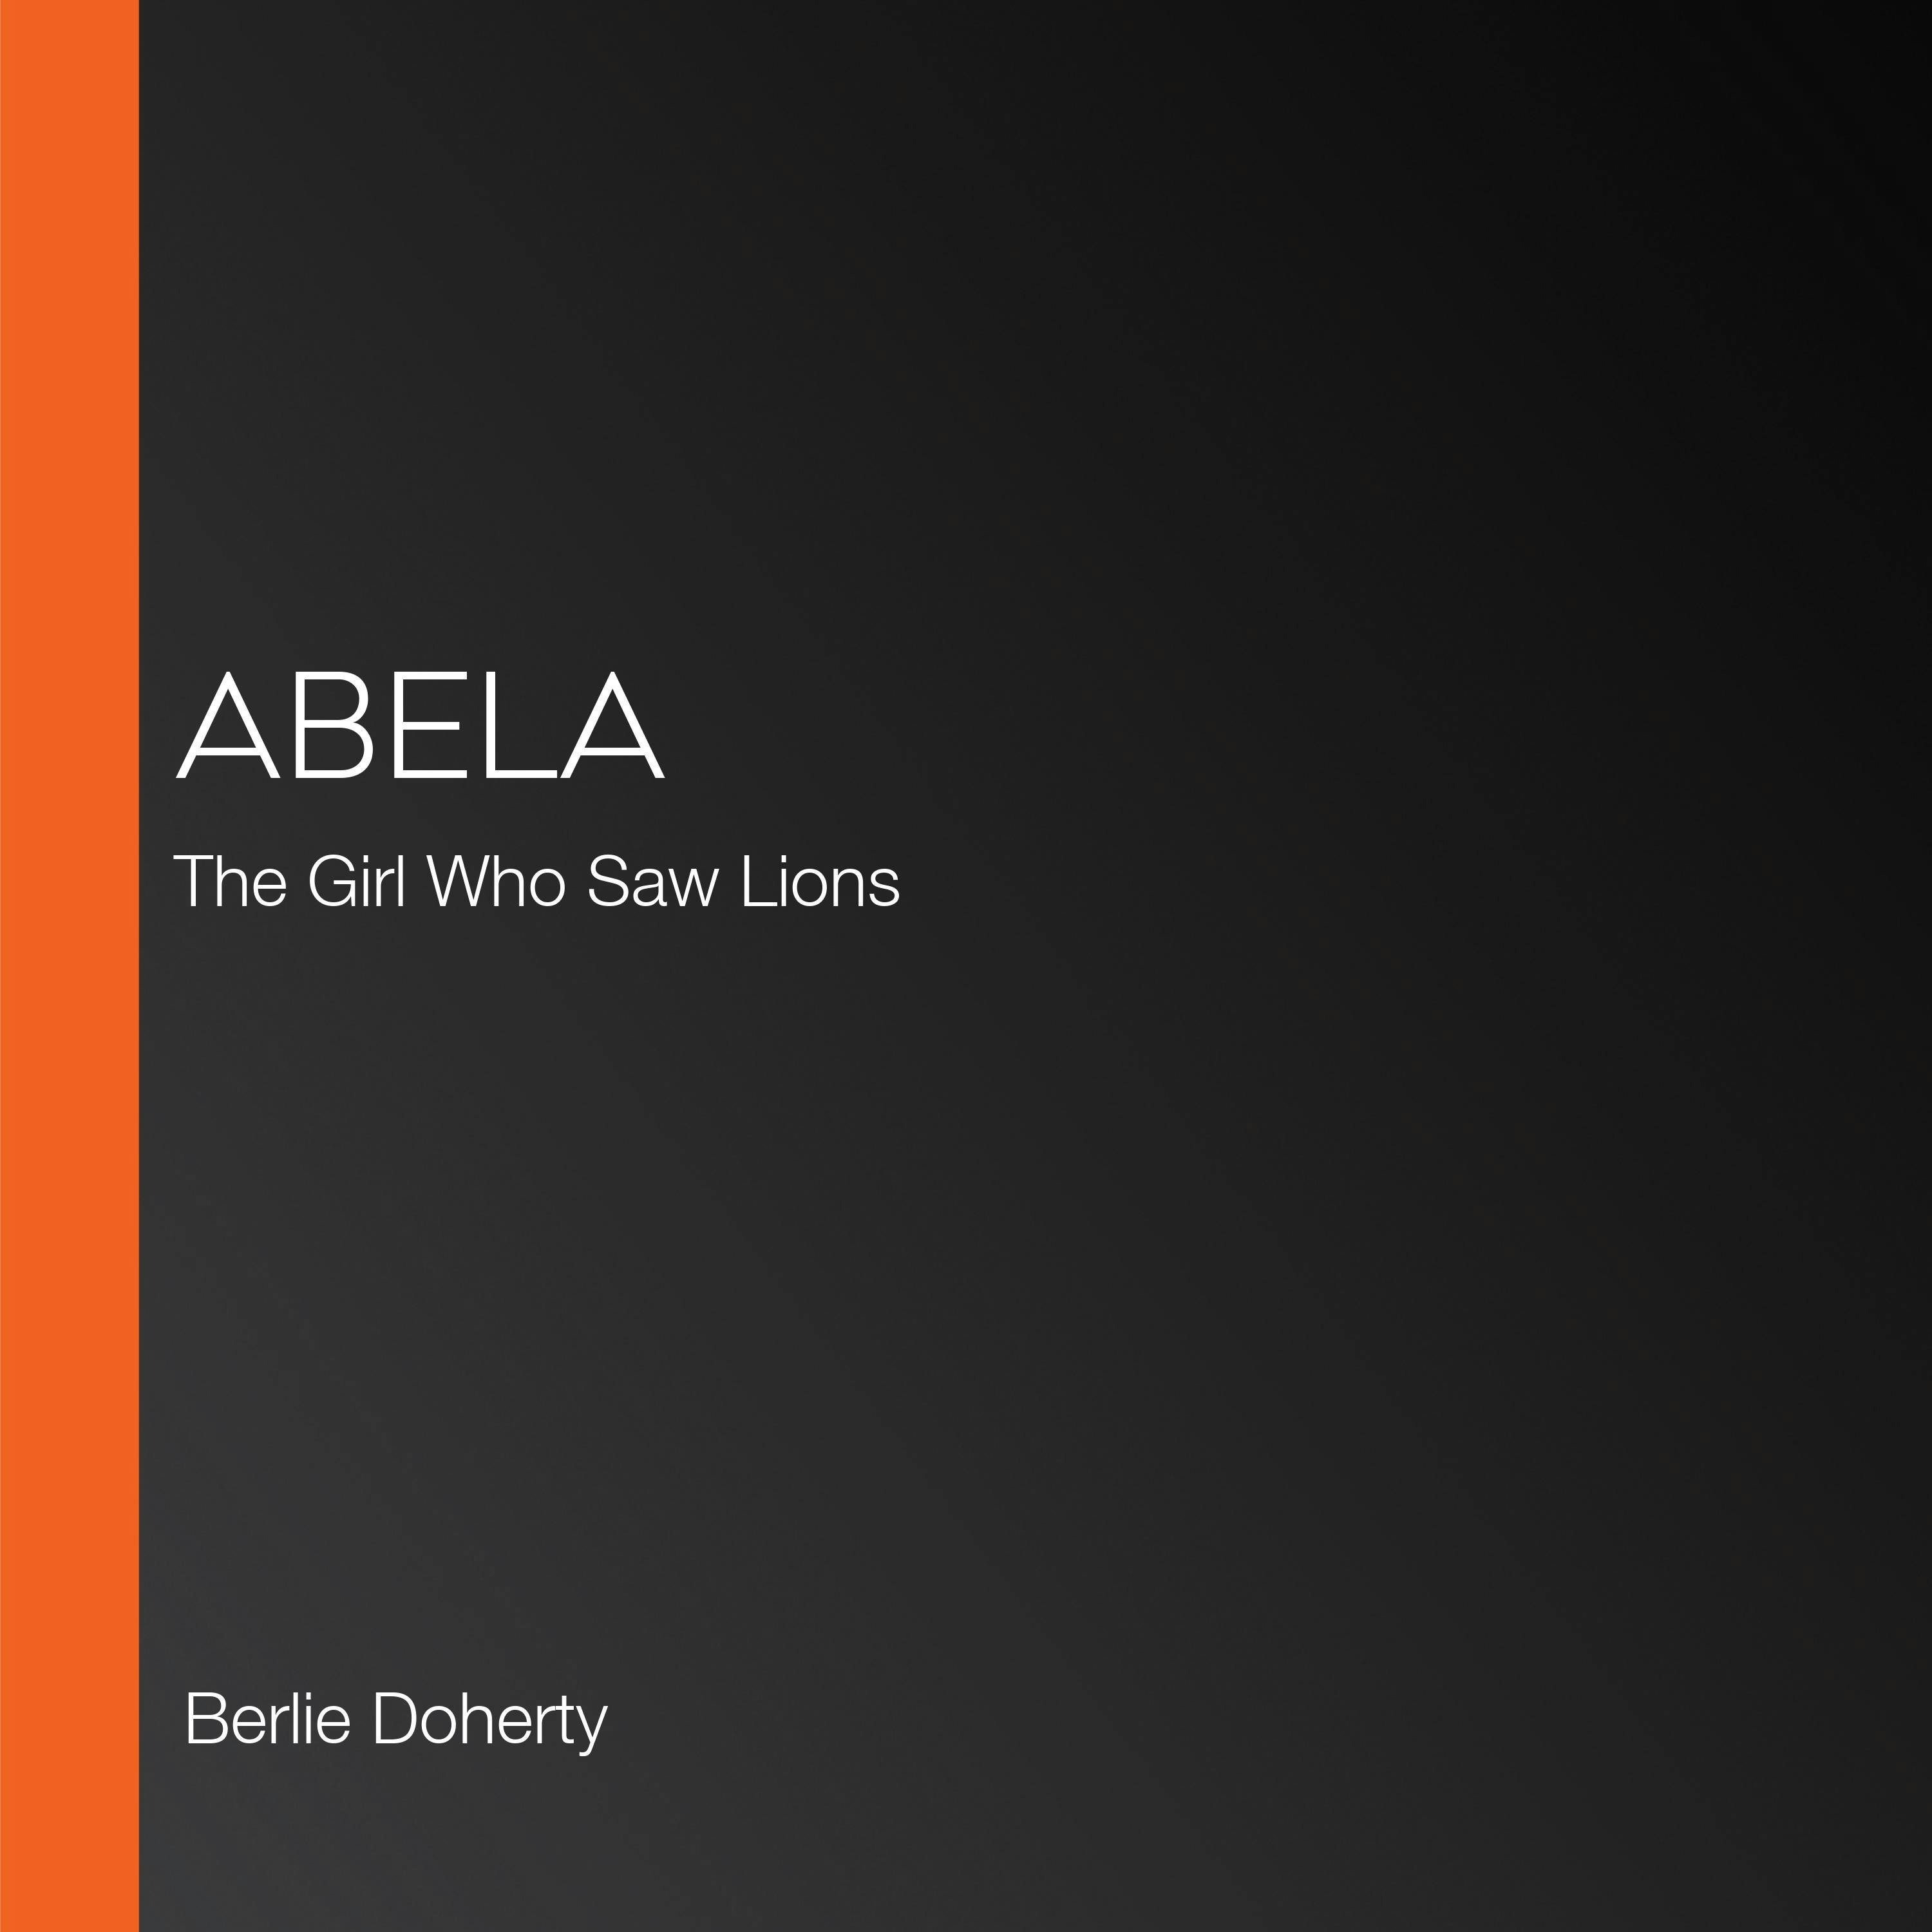 Abela: The Girl Who Saw Lions - Berlie Doherty